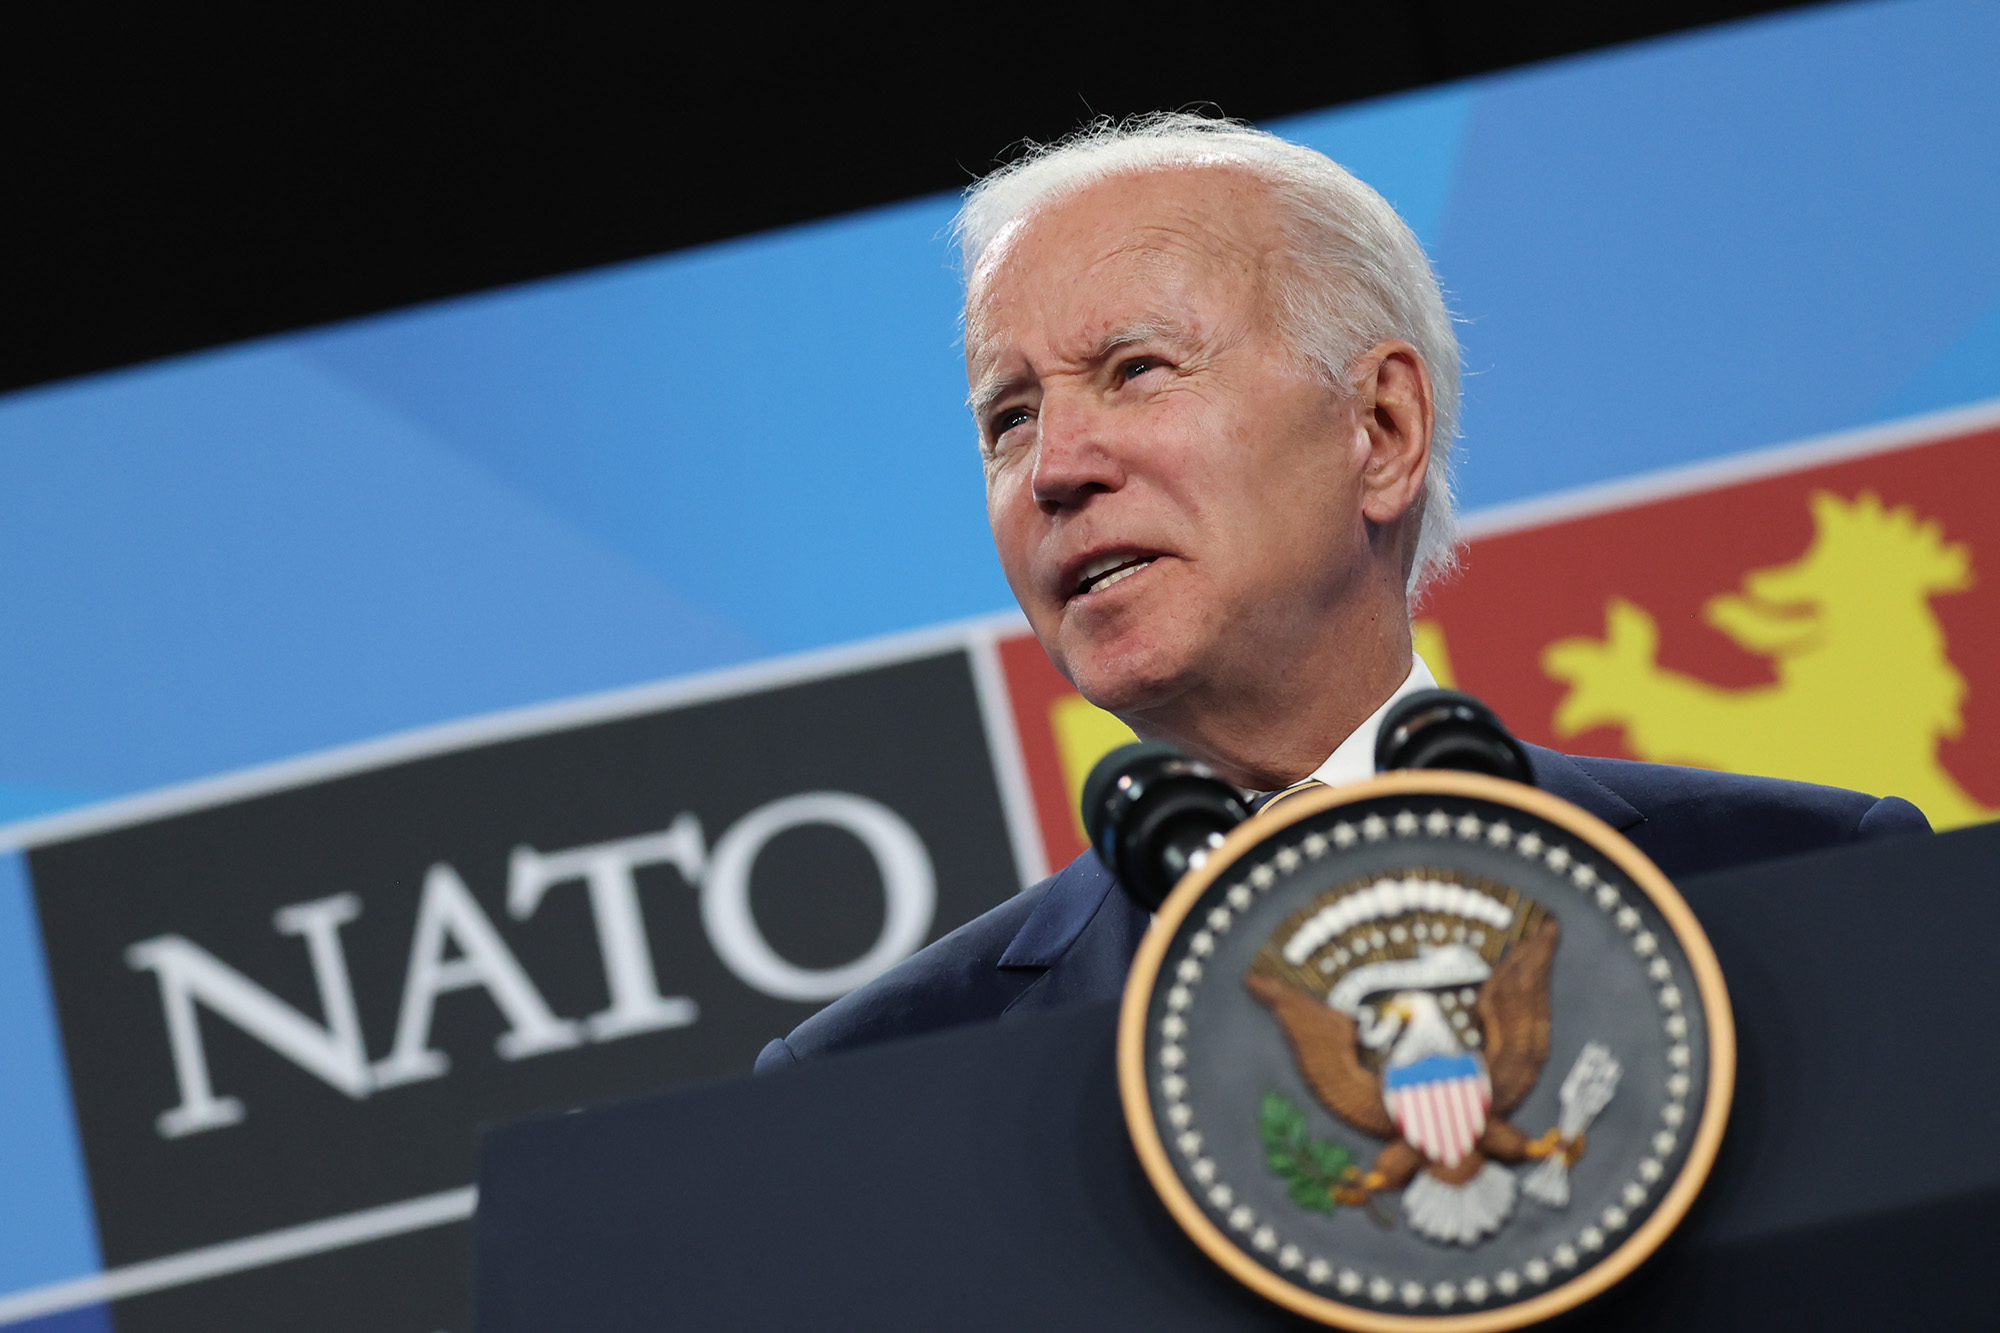 President Joe Biden speaks during a press conference on the final day of the NATO Summit in Madrid, Spain on June 30.